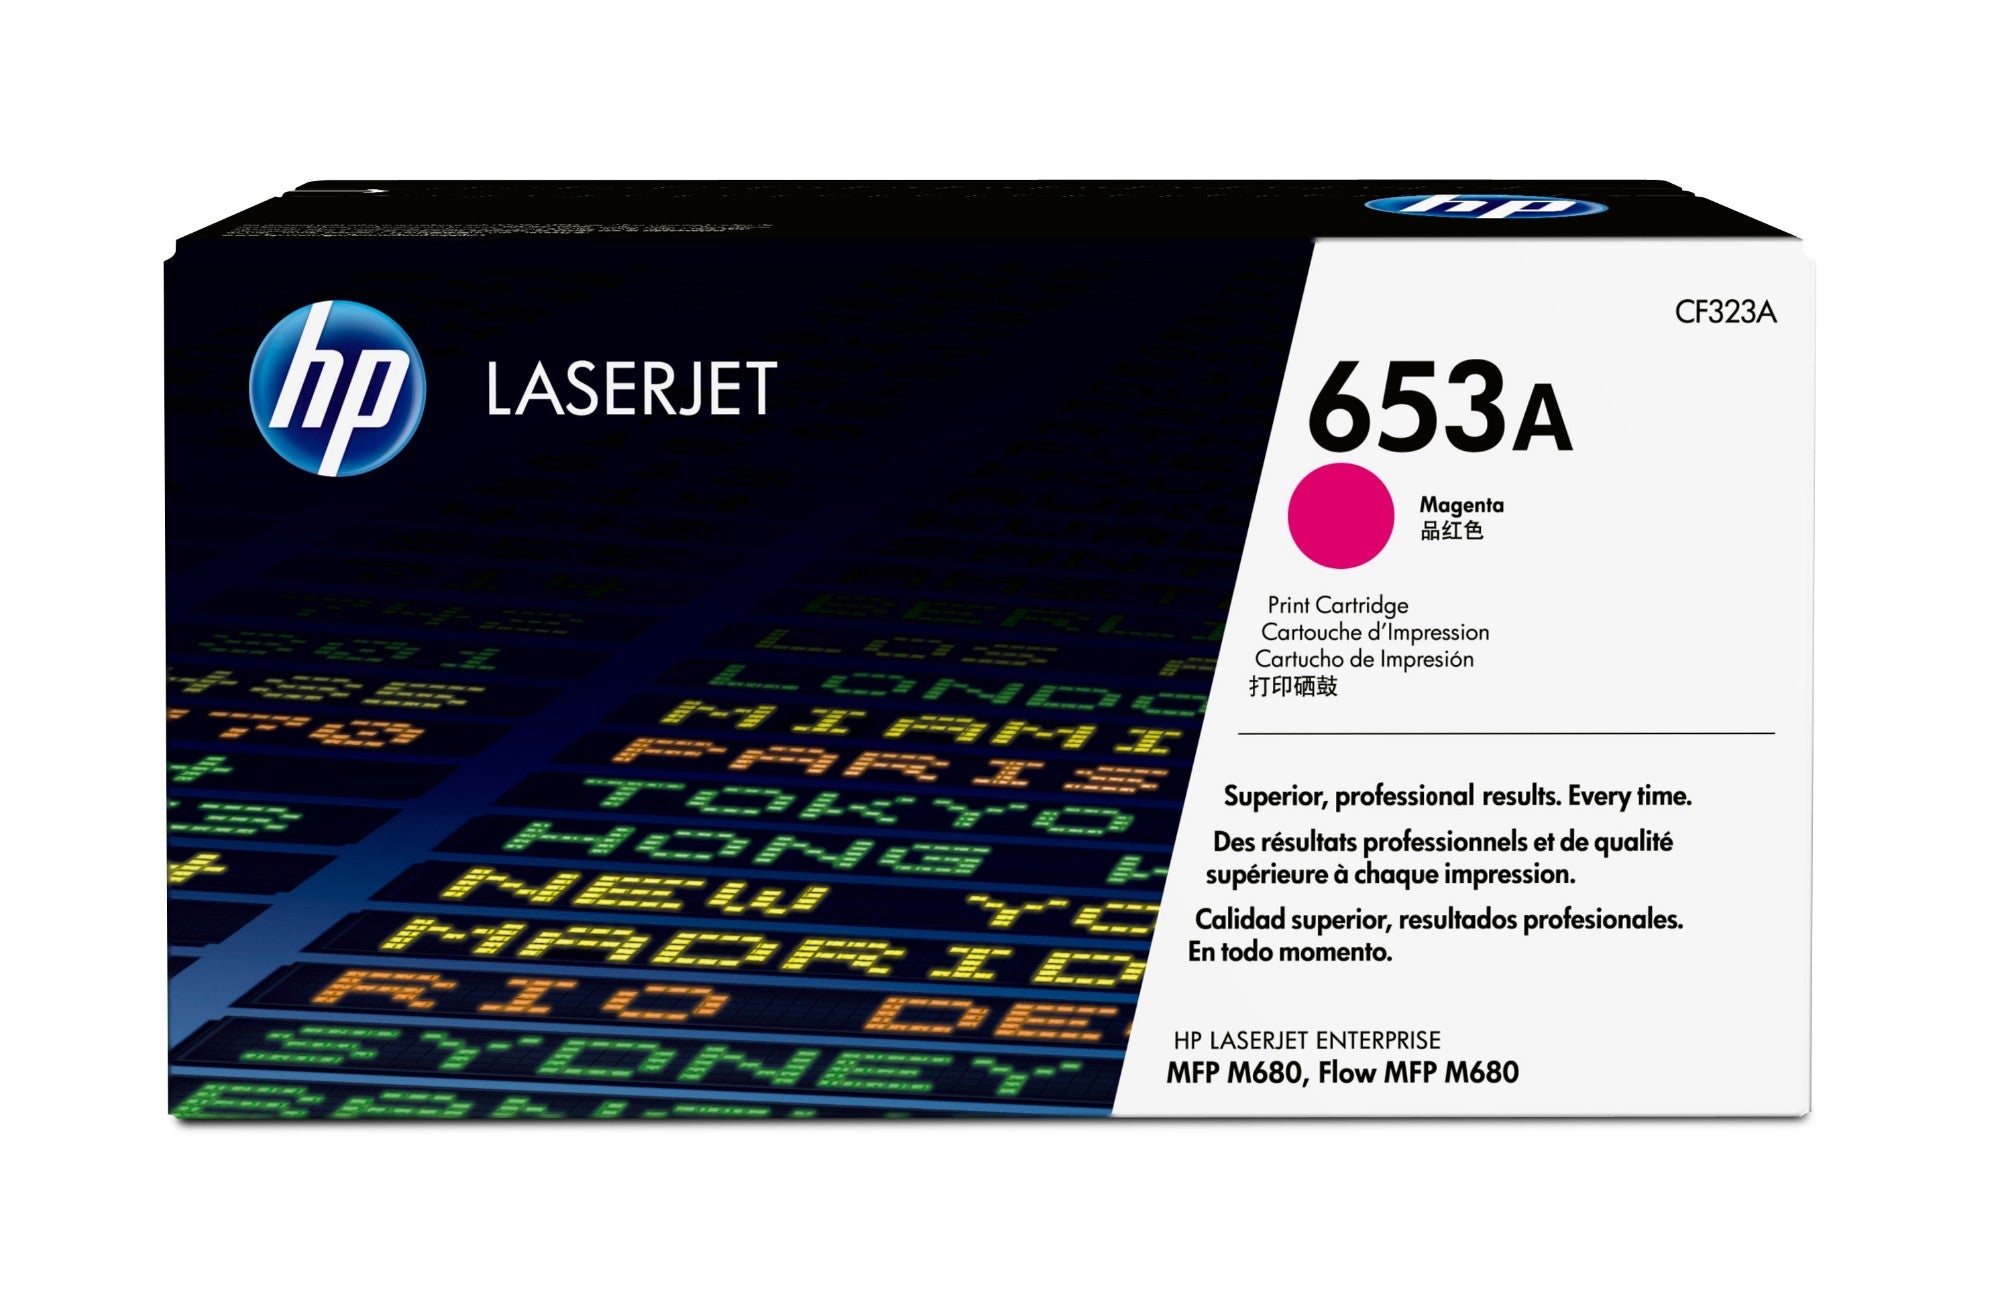 HP CF323A/653A Toner cartridge magenta, 16.5K pages ISO/IEC 19798 for HP Color LaserJet M 680